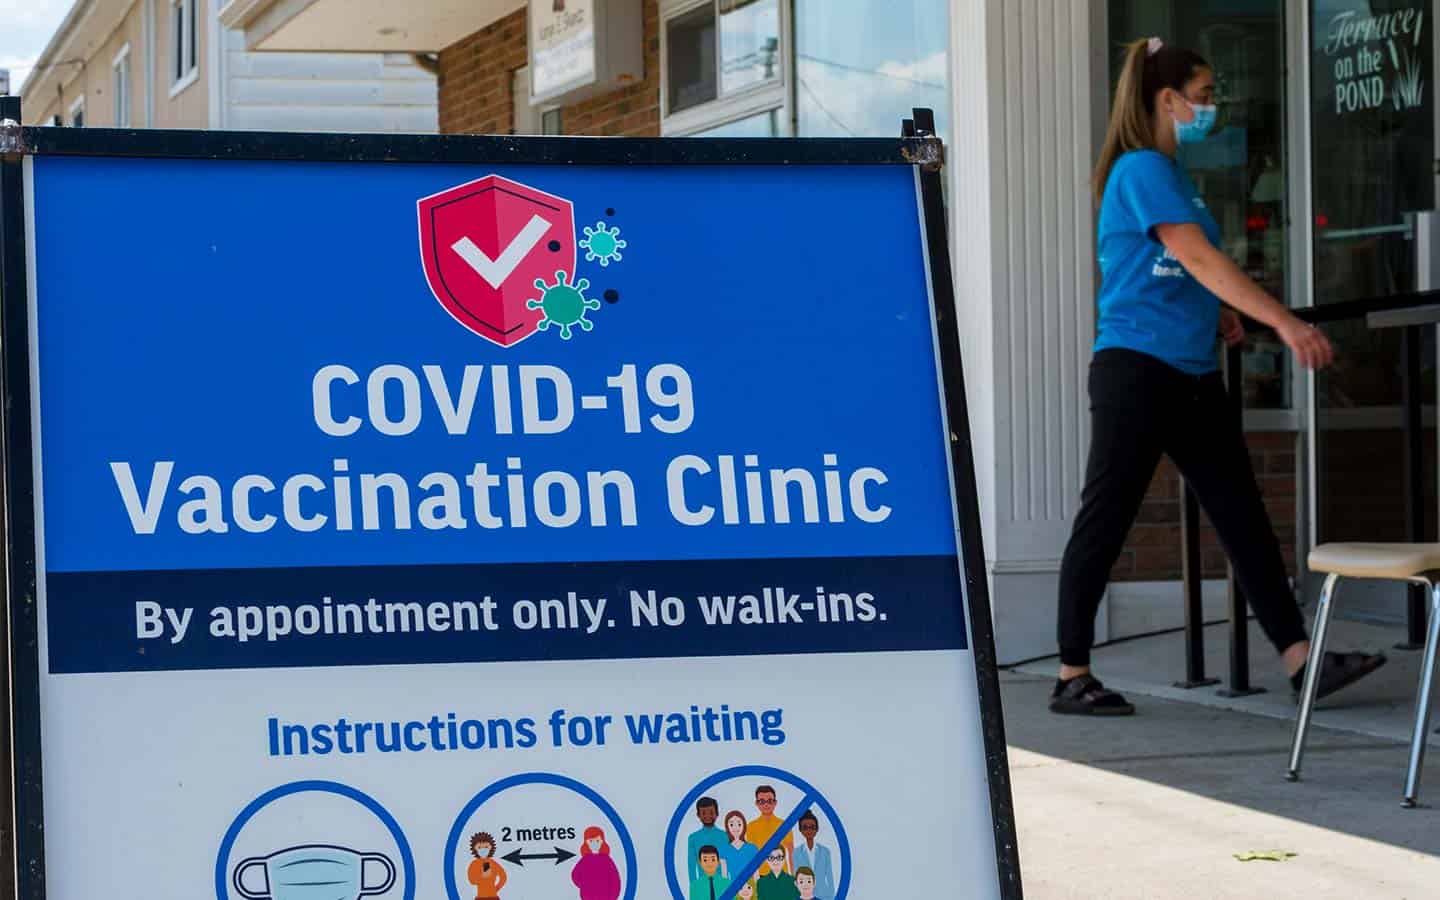 COVID-19 cases continue downward trend in region